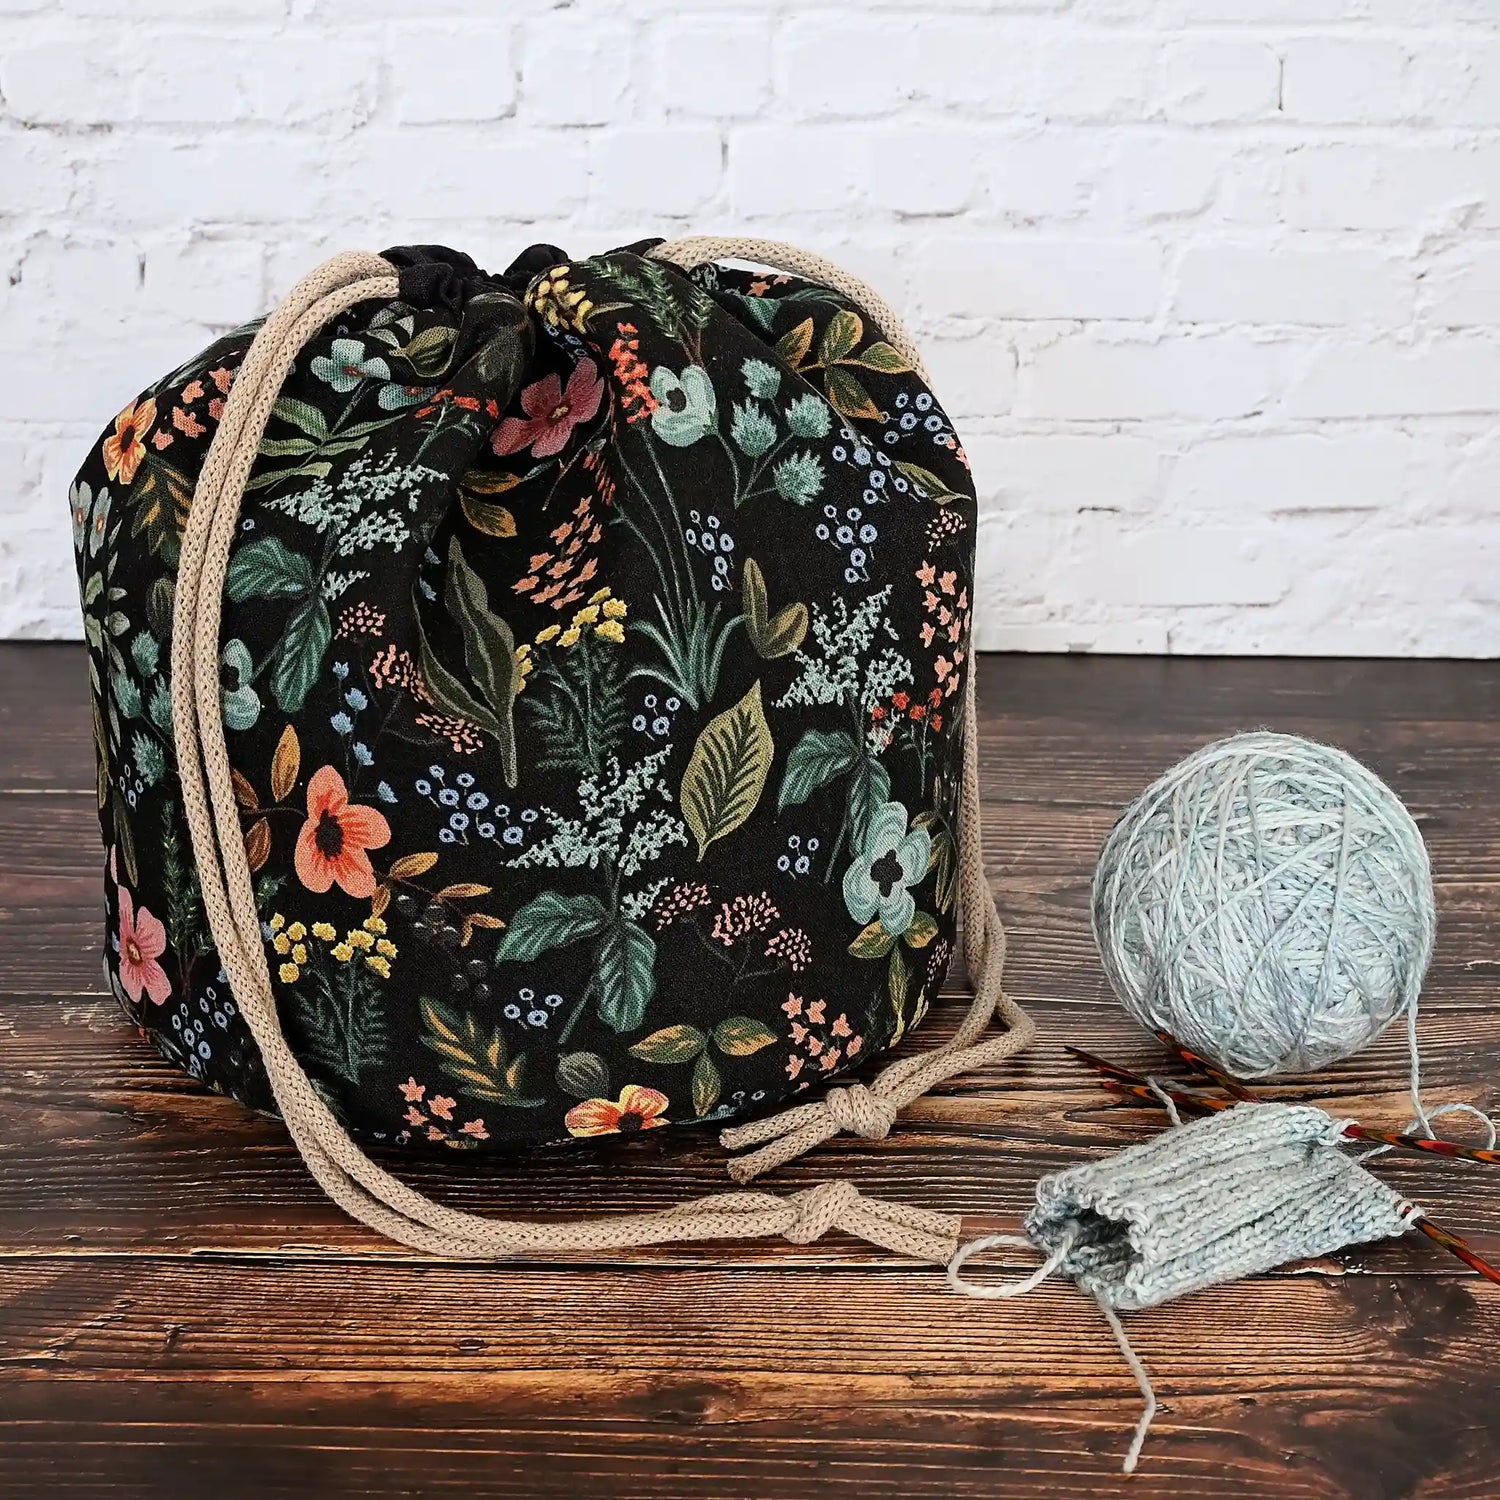 Black floral bucket style project bag with lots of pockets.  Made from Rifle Paper Co's Amalfi canvas, this drawstring bag features a quilted base for design and stability.  Handmade in Canada by Yellow Petal Handmade.